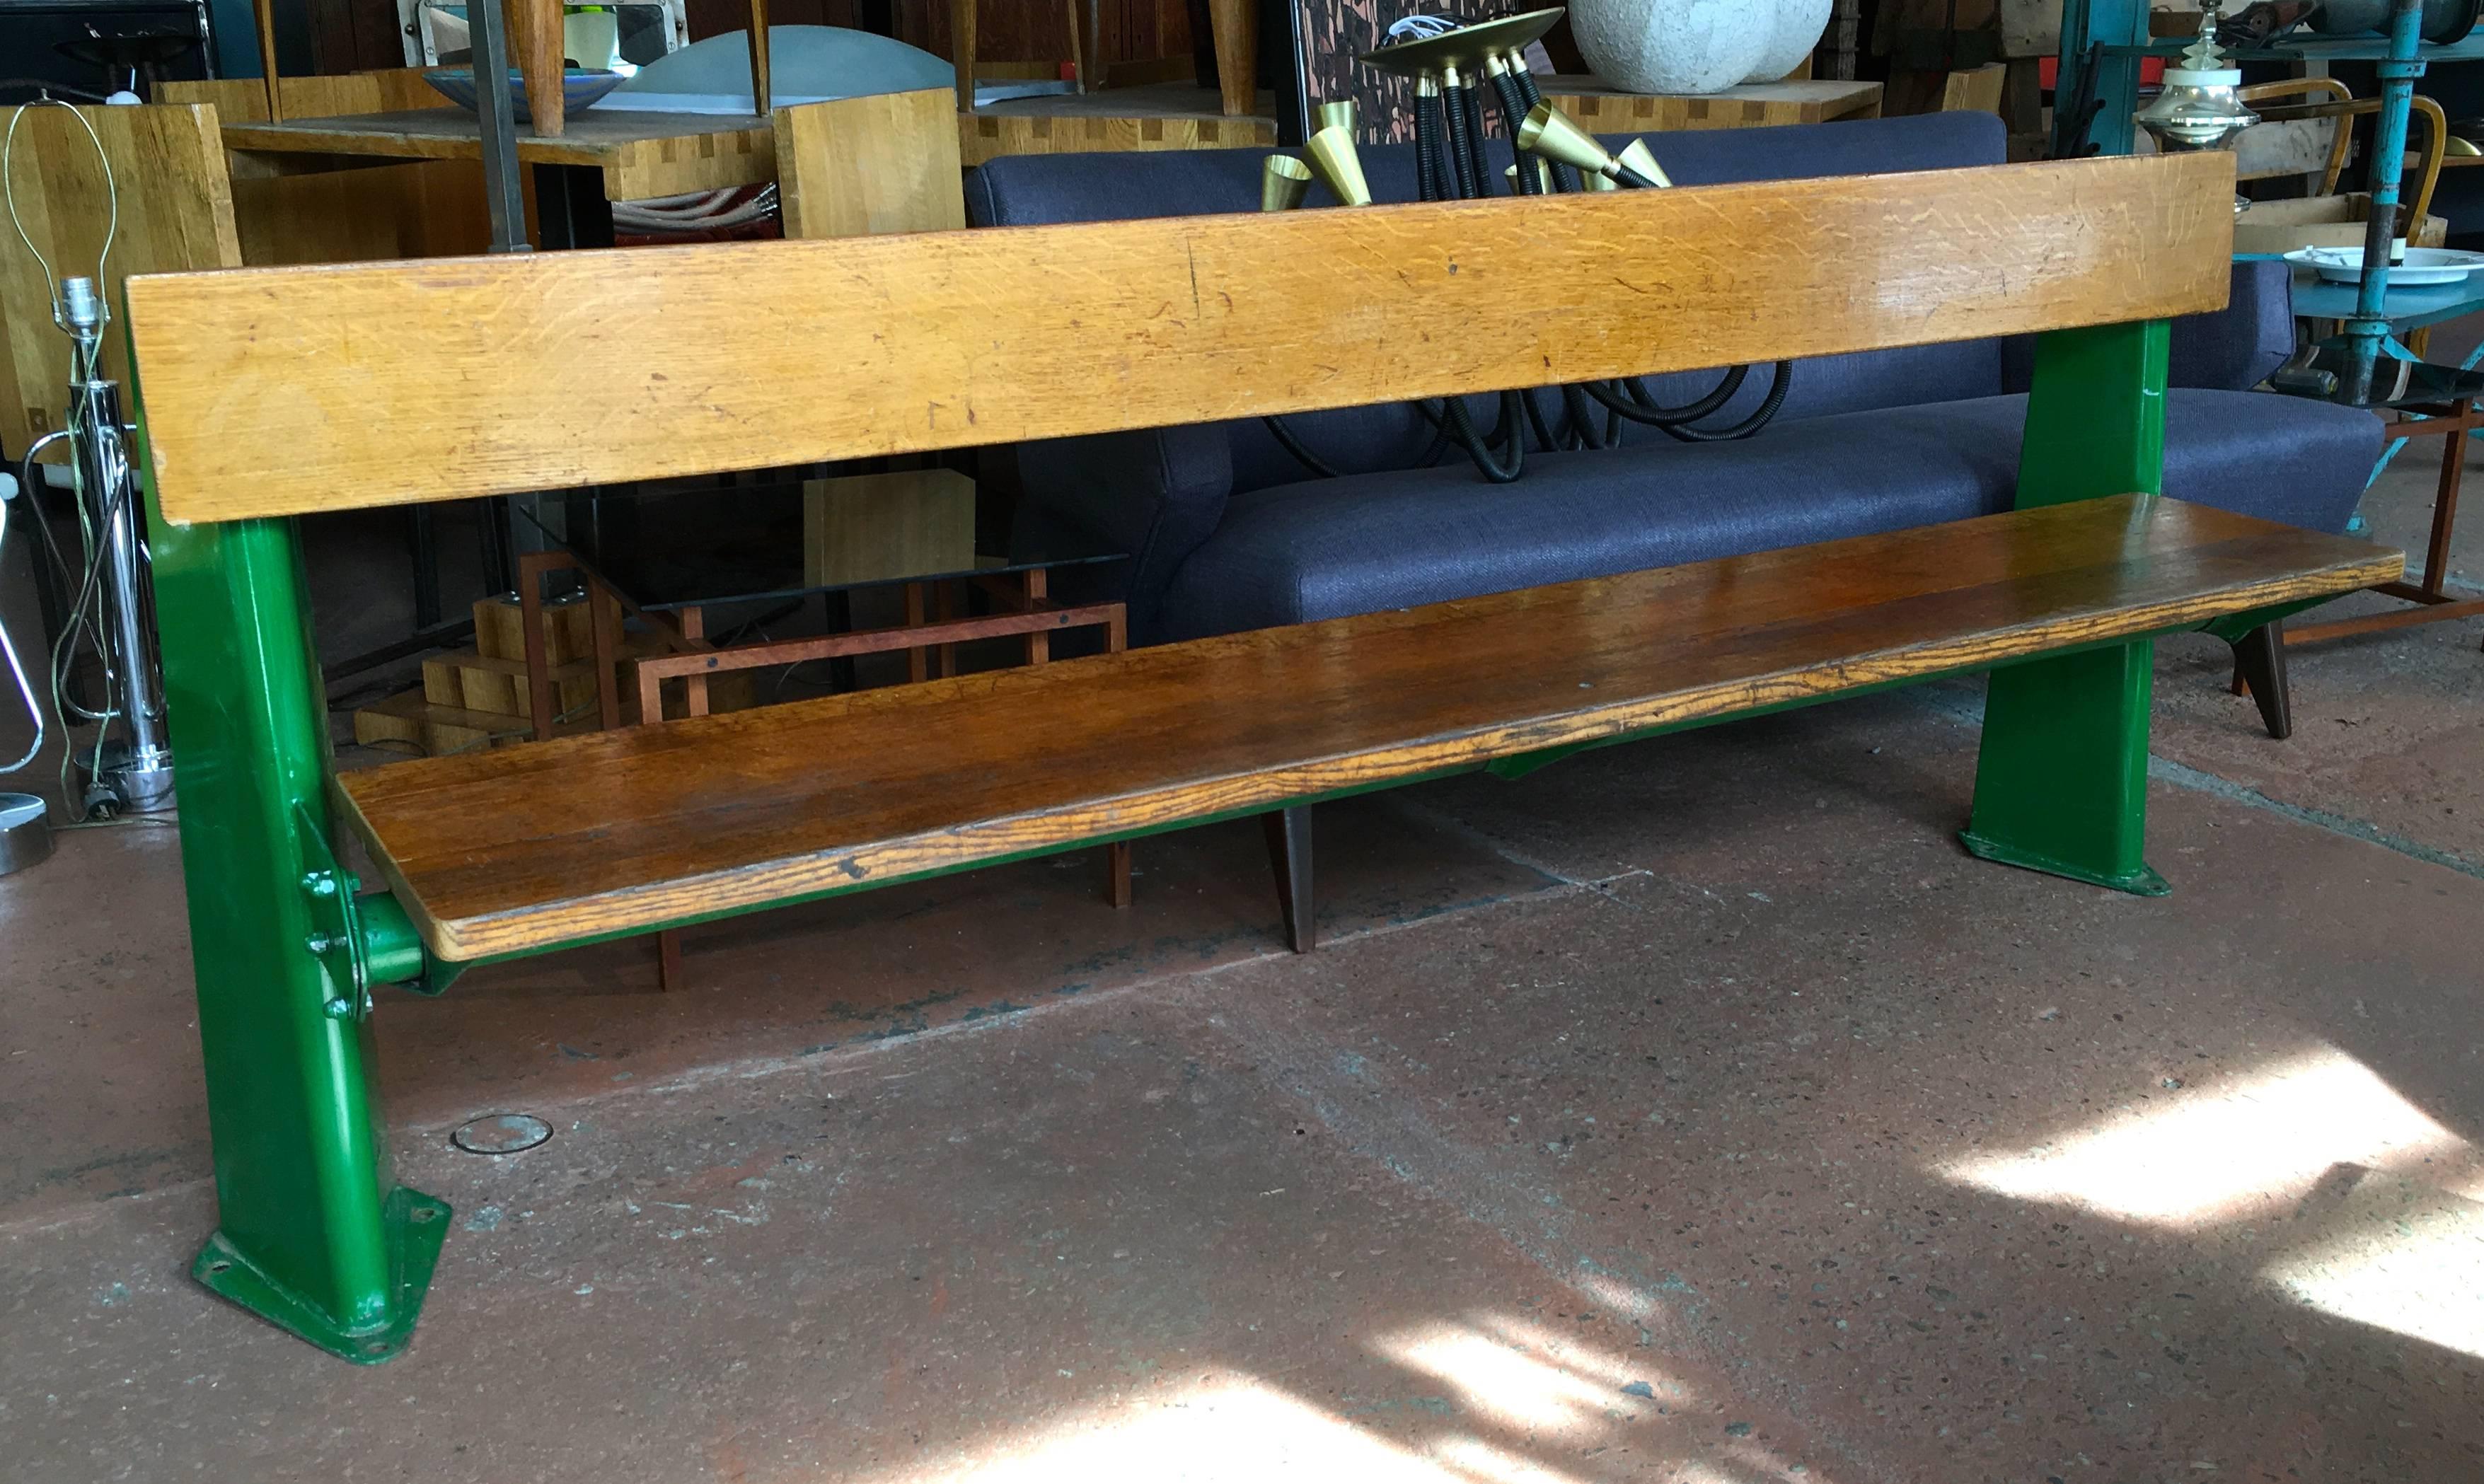 Mid-Century Modern Bench by Jean Prouve, circa 1957